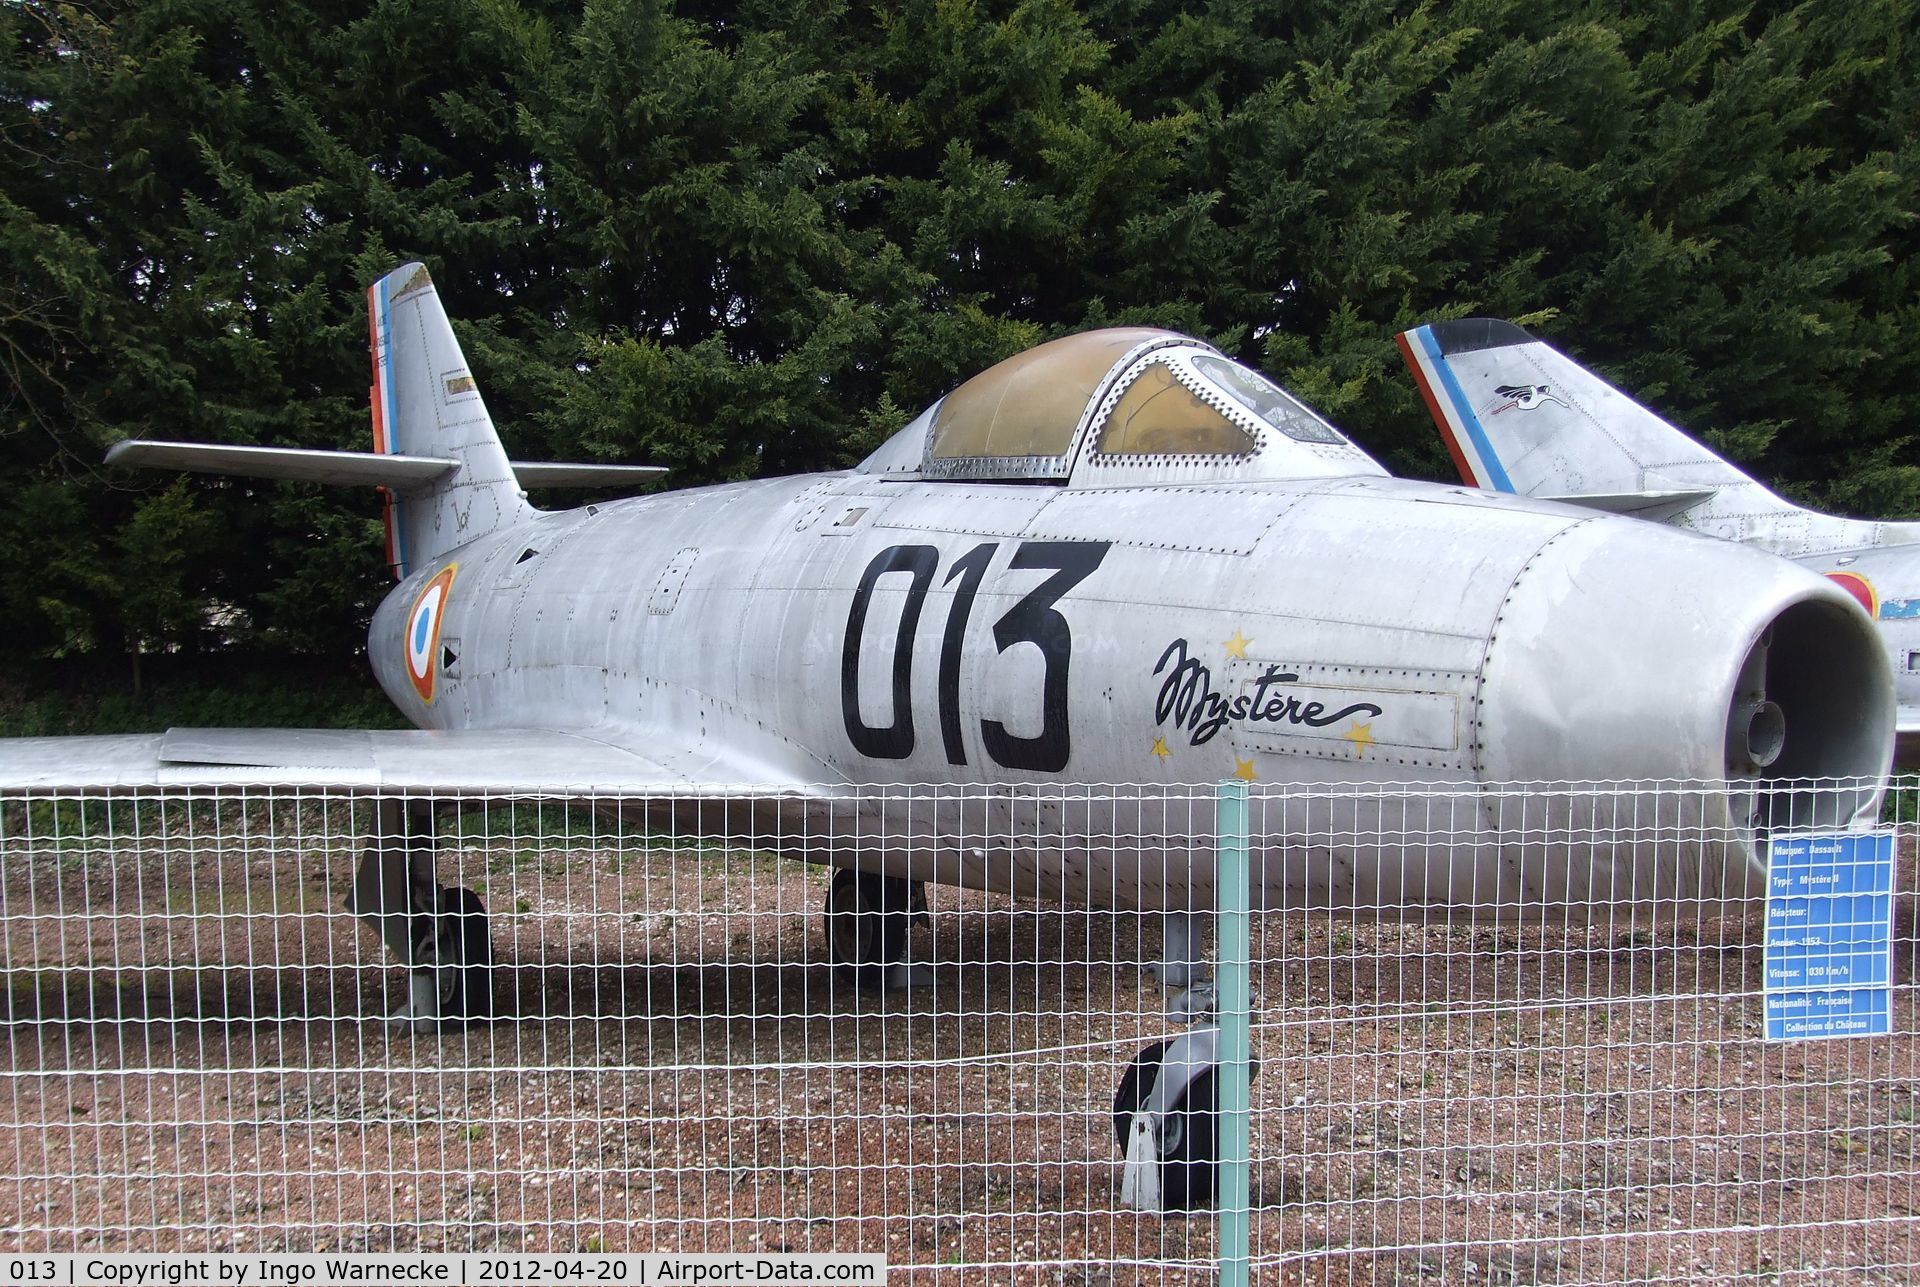 013, Dassault Mystere IIC C/N 013, Dassault Mystere II C at the Musee de l'Aviation du Chateau, Savigny-les-Beaune